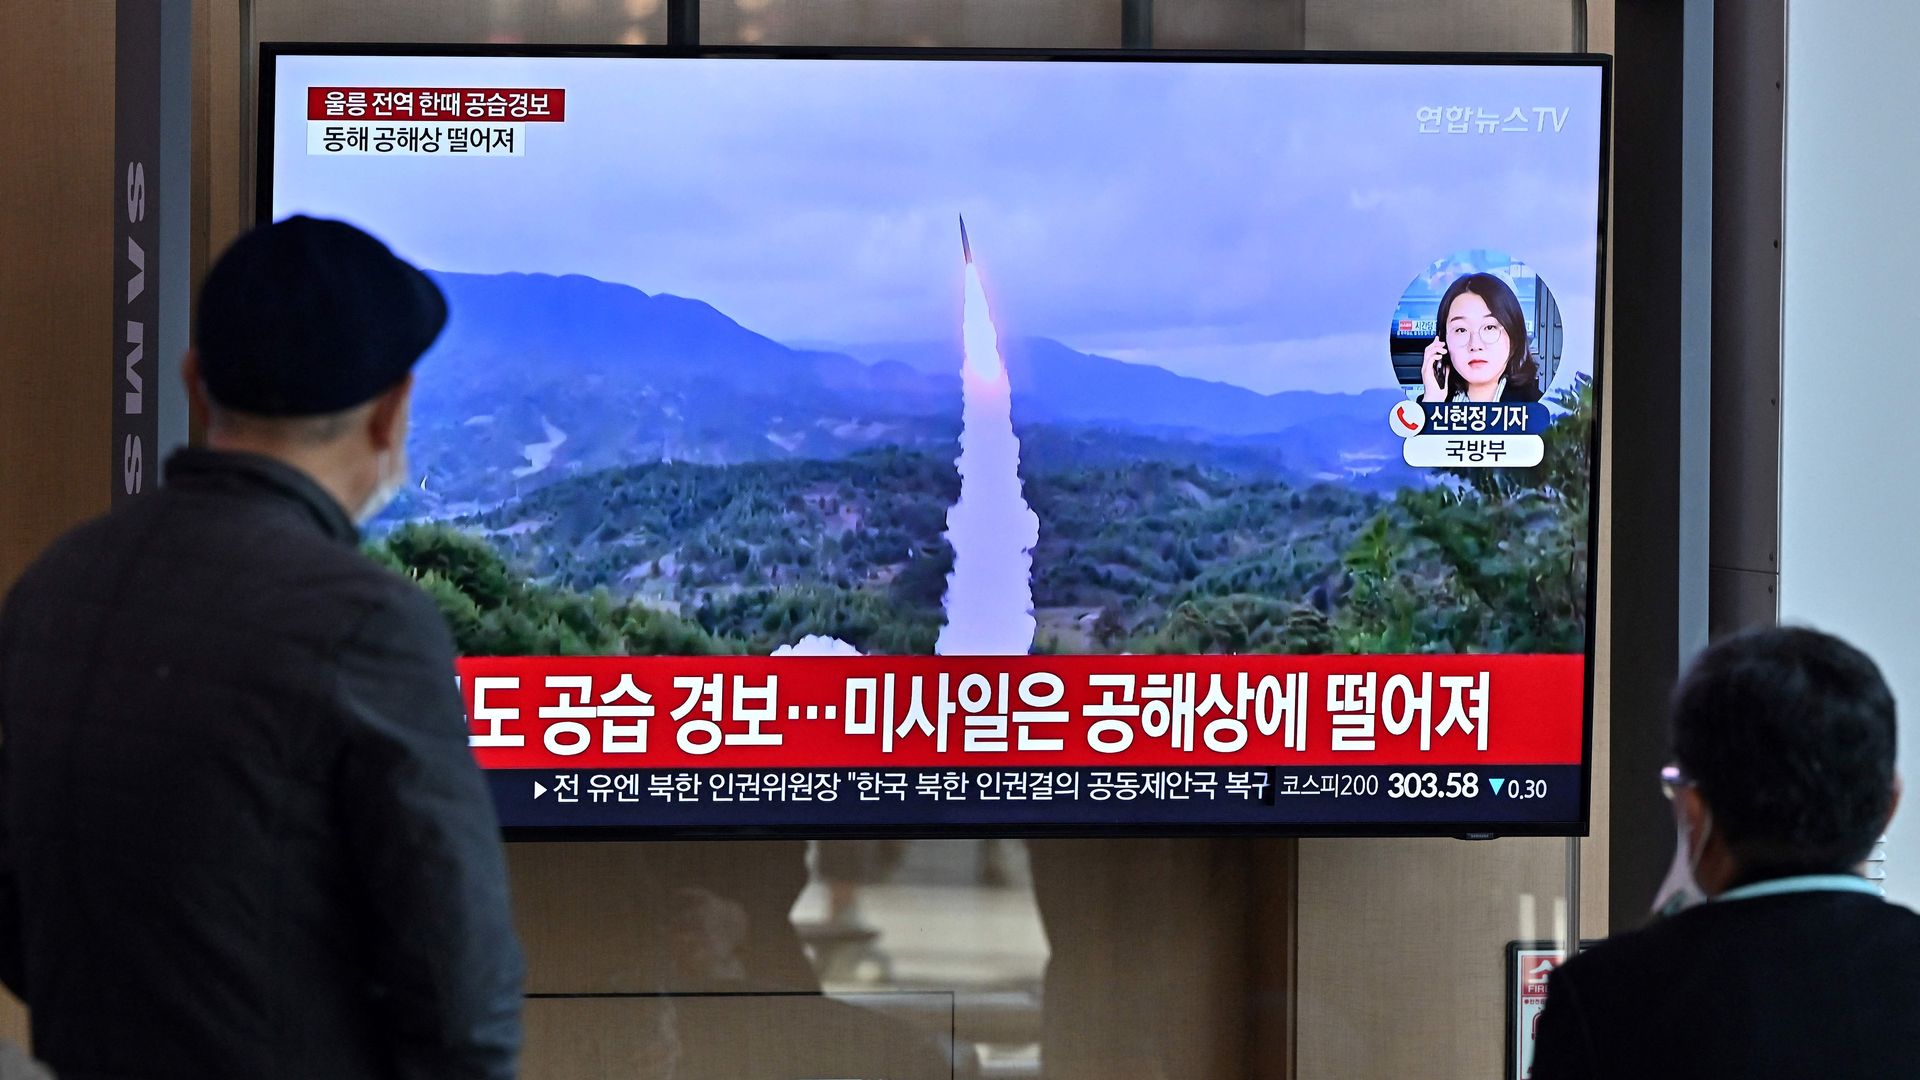 People watch a television screen showing a news broadcast with file footage of a North Korean missile test, at a railway station in Seoul on November 2.